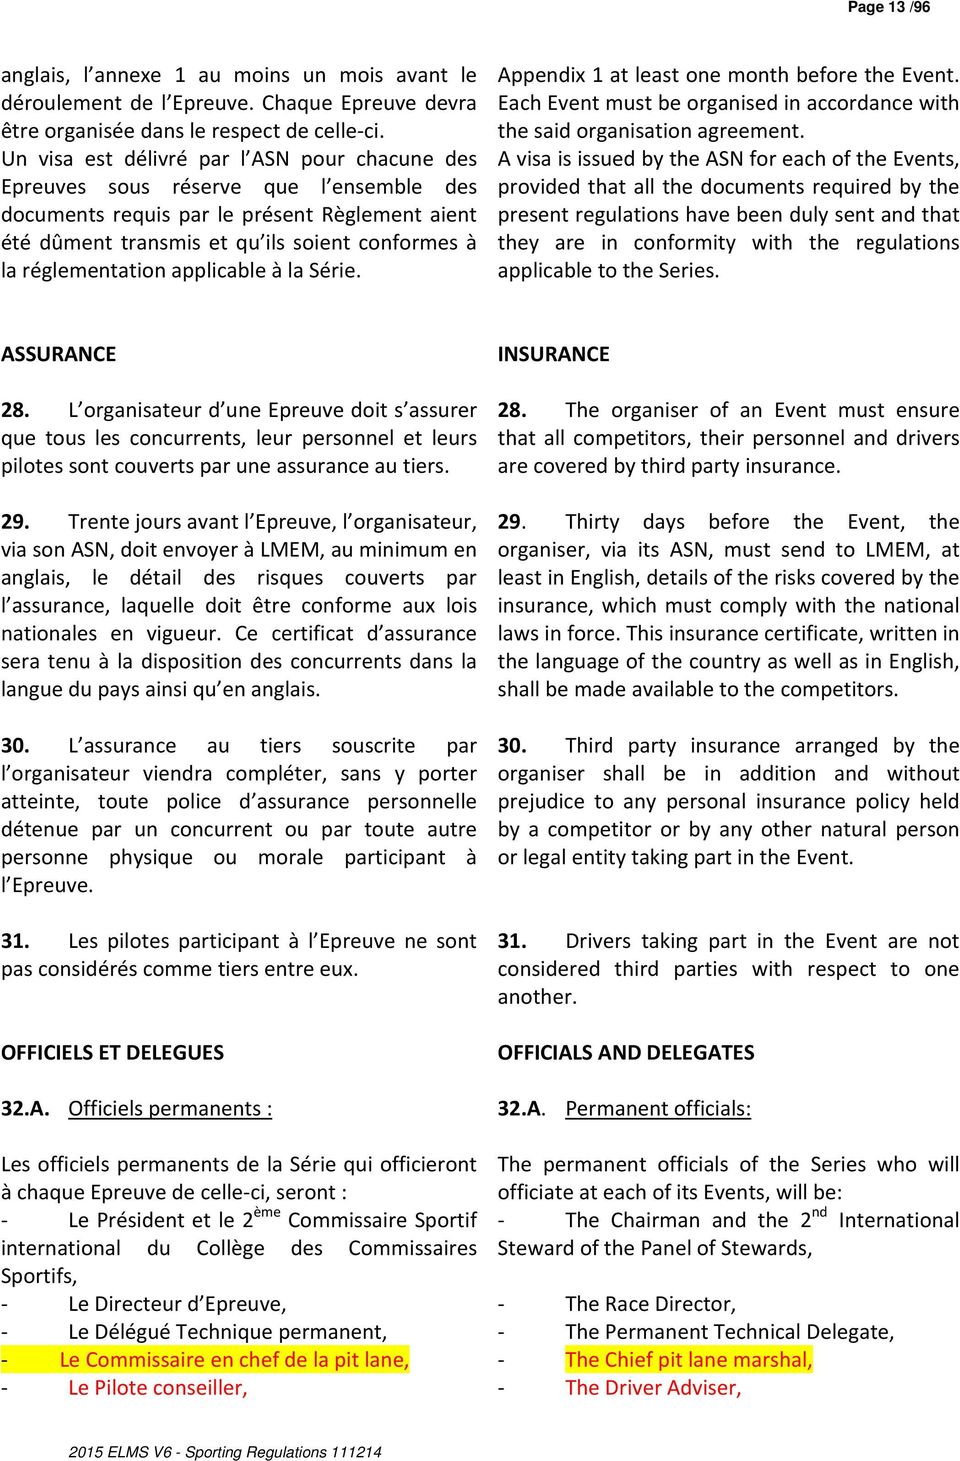 réglementation applicable à la Série. Appendix 1 at least one month before the Event. Each Event must be organised in accordance with the said organisation agreement.